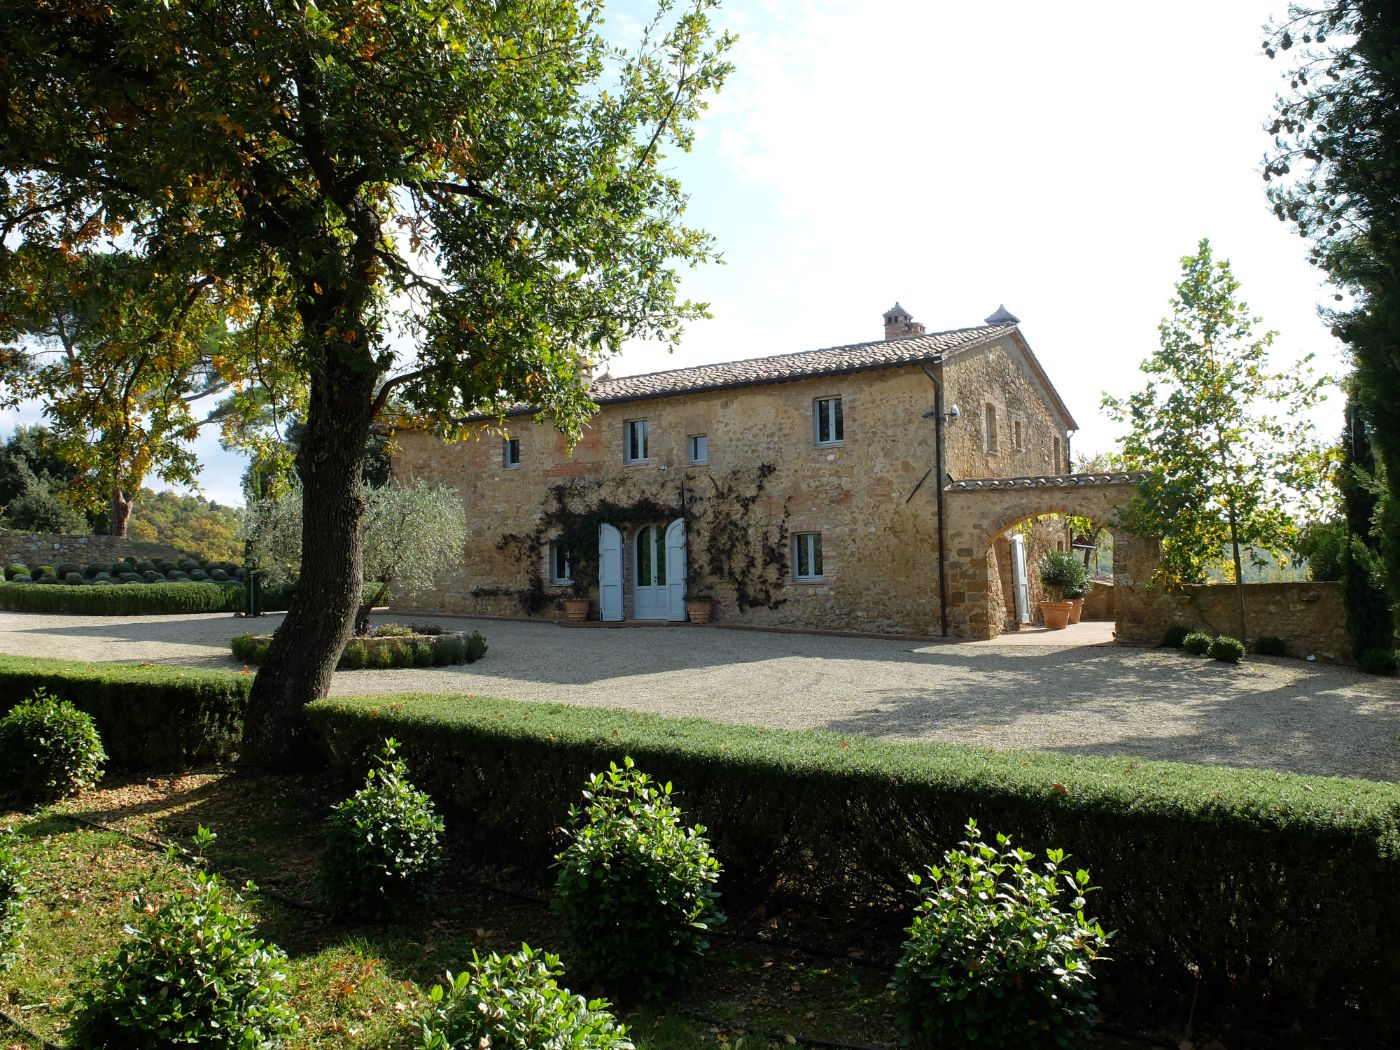 The front of Podere Caterina